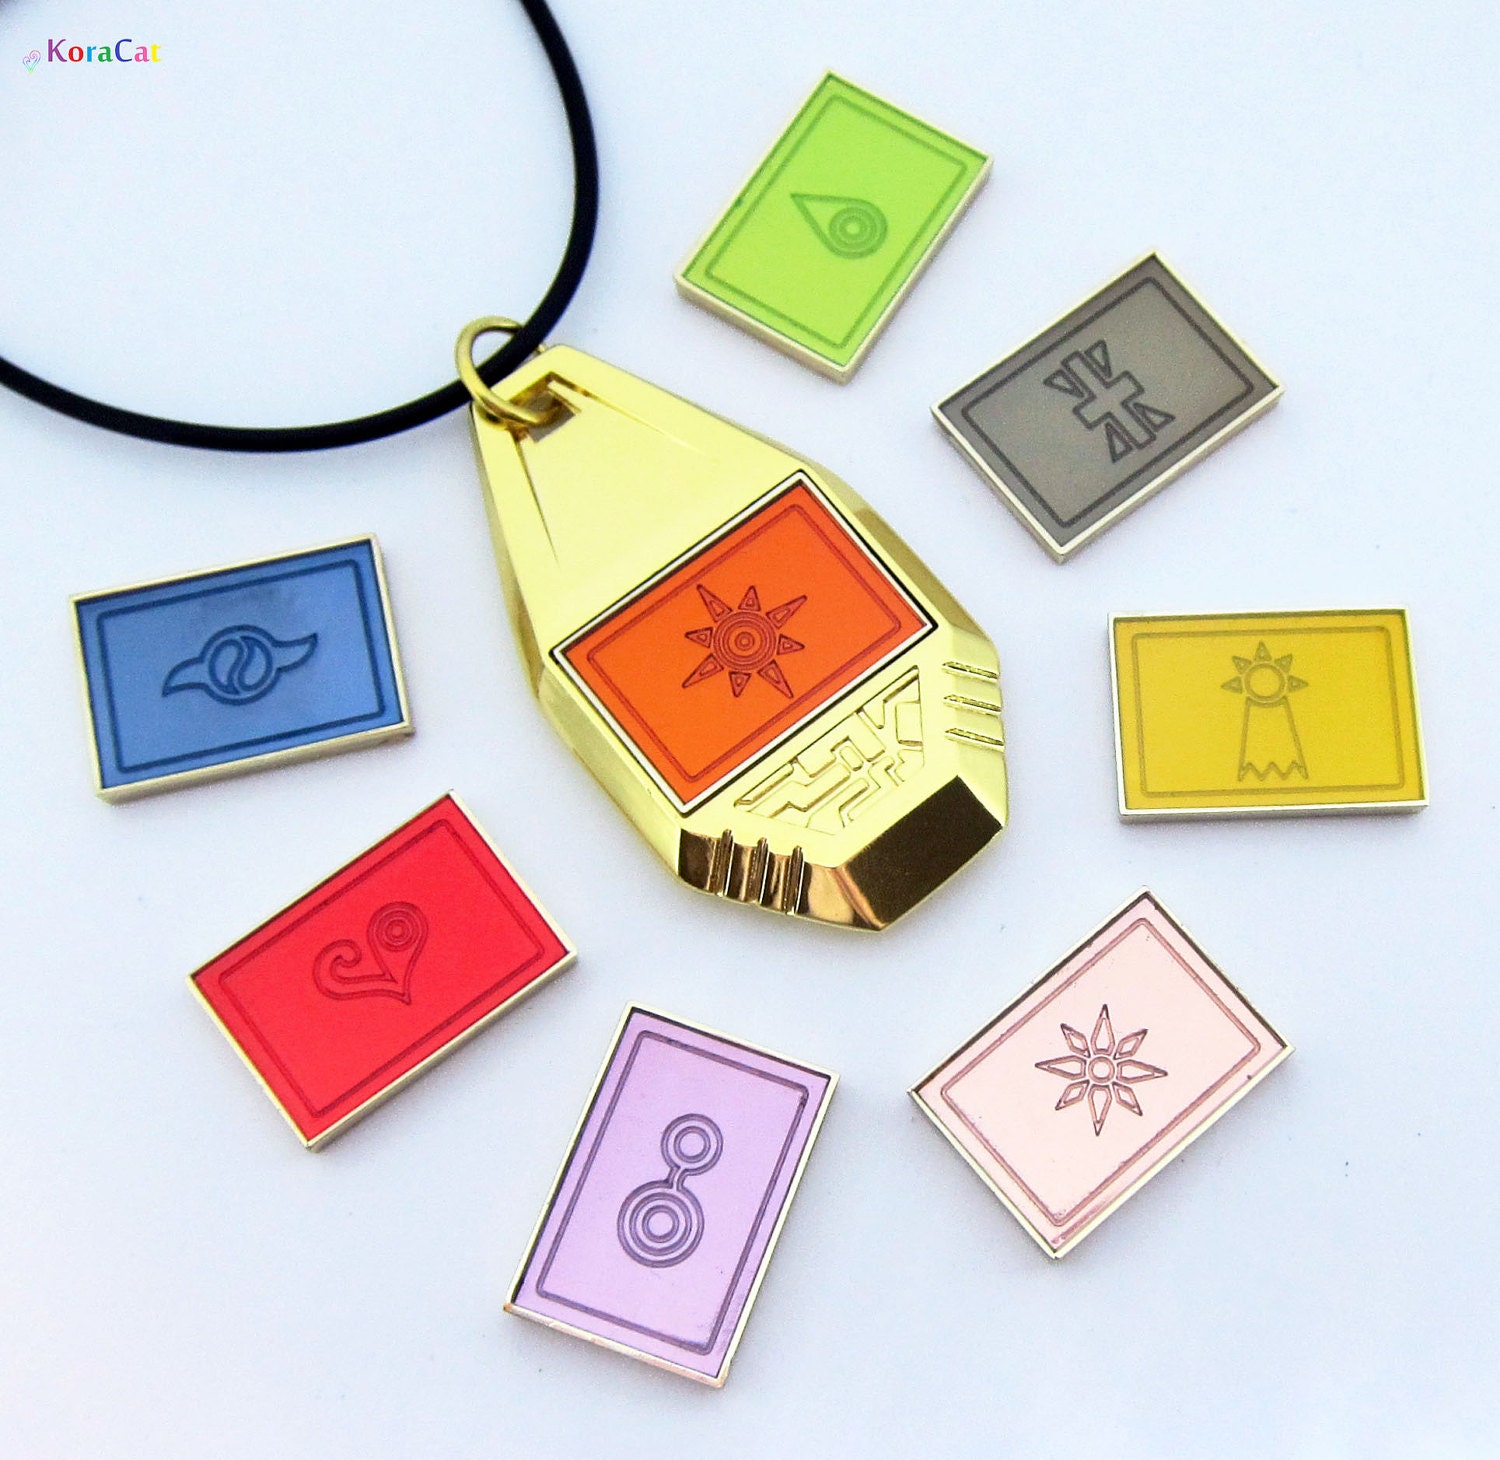 Digimon Tag Removable Crests Complete Set Agrohort Ipb Ac Id